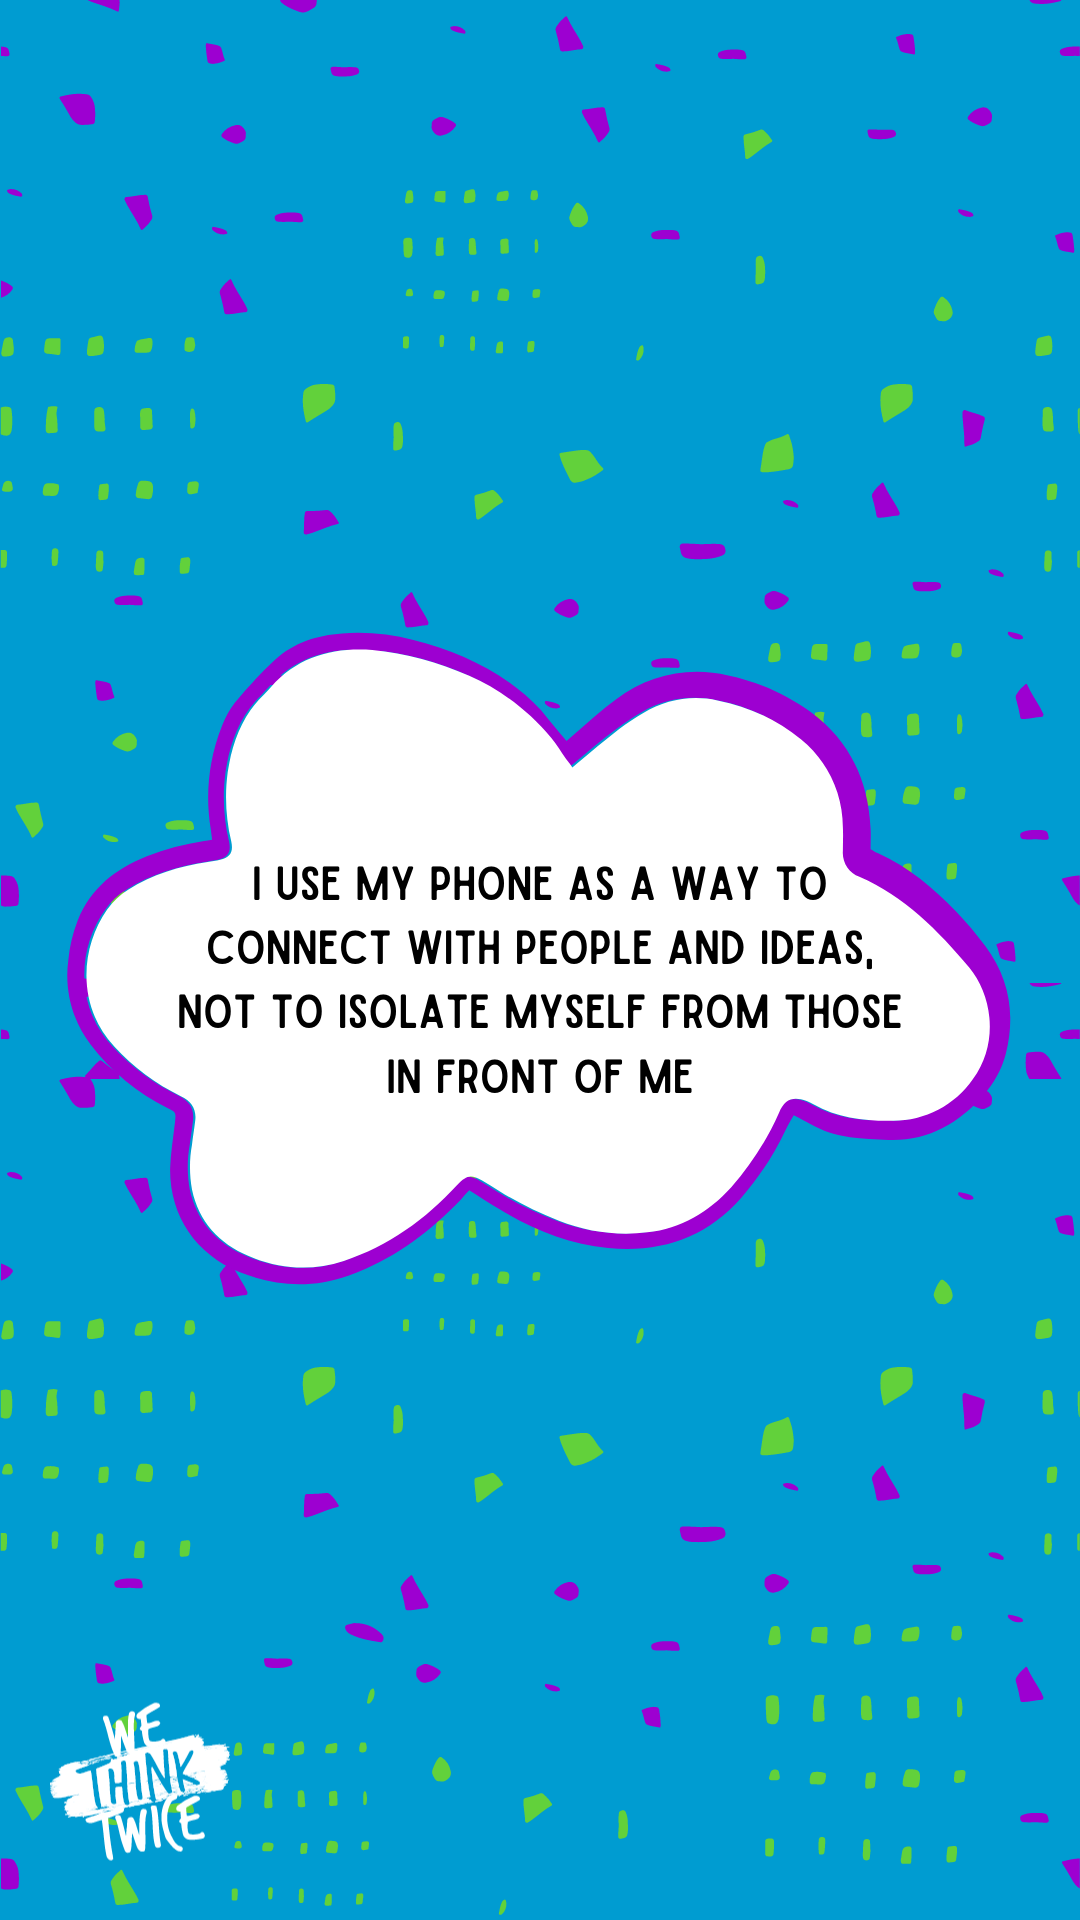 I use my phone as a way to connect with people and ideas, not to isolate myself from those in front of me